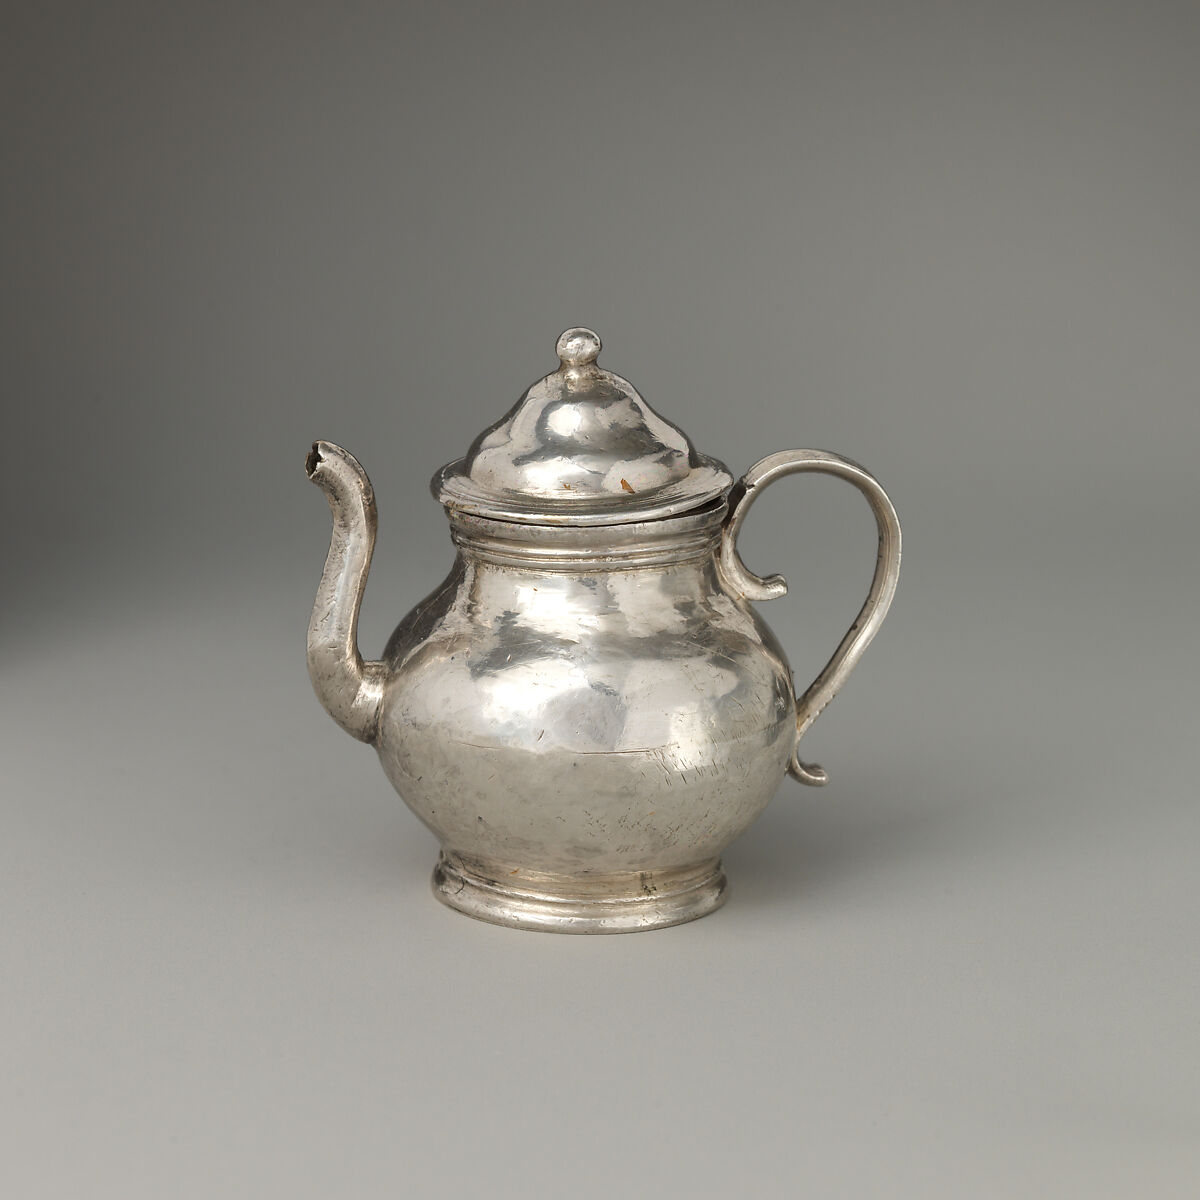 Miniature teapot with cover (part of a set), David Clayton (British, active 1689), Silver, British, London 